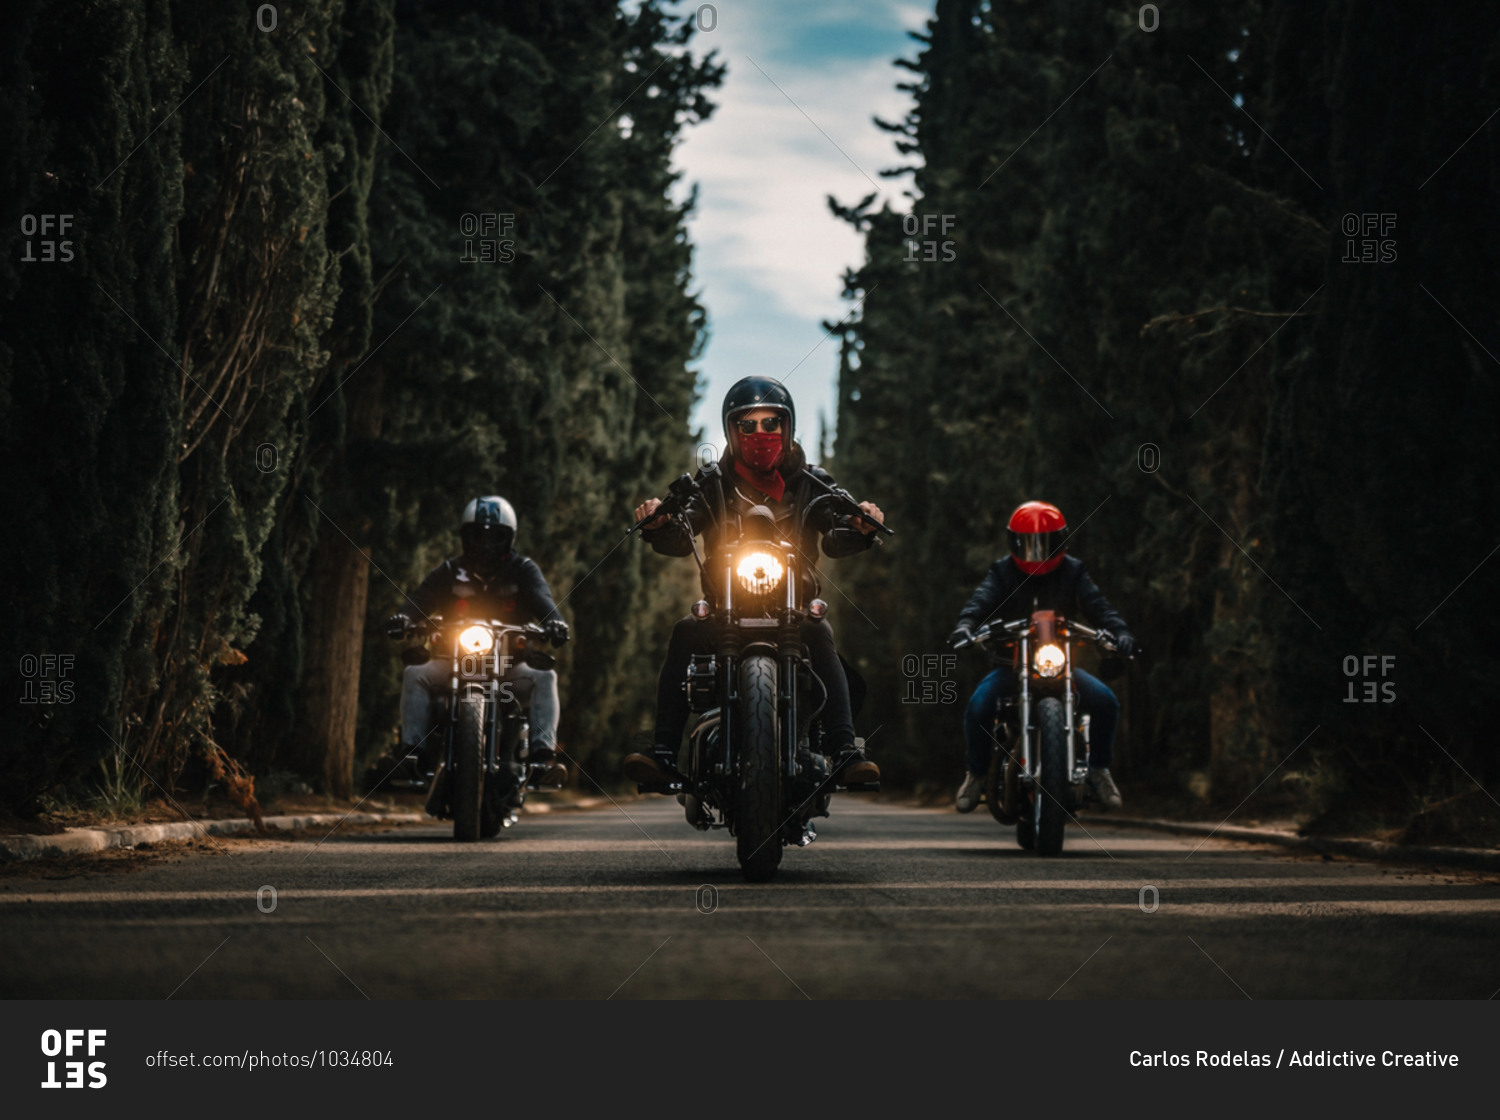 Group of bikers in black leather jackets and helmets riding powerful motorcycles on asphalt road leading between green forest in countryside